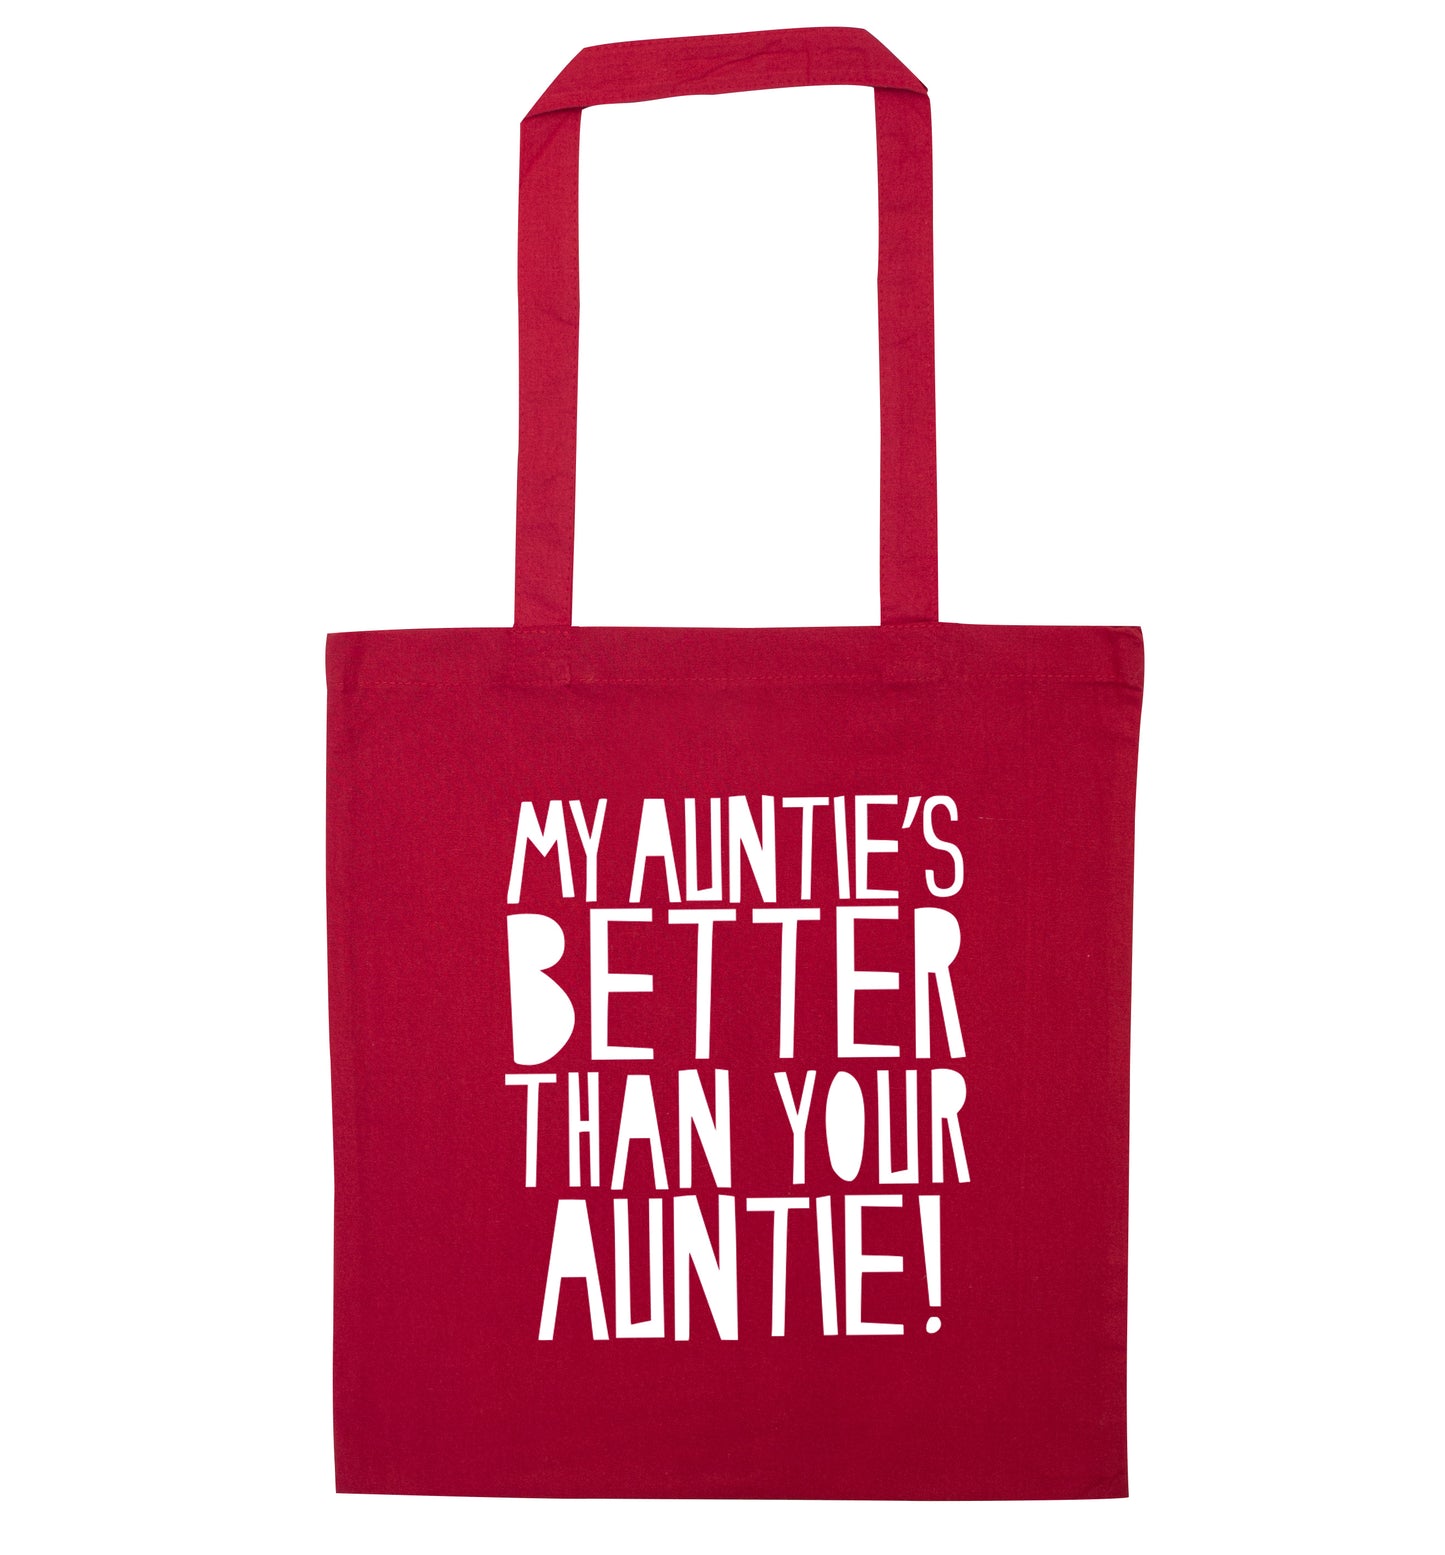 My auntie's better than your auntie red tote bag